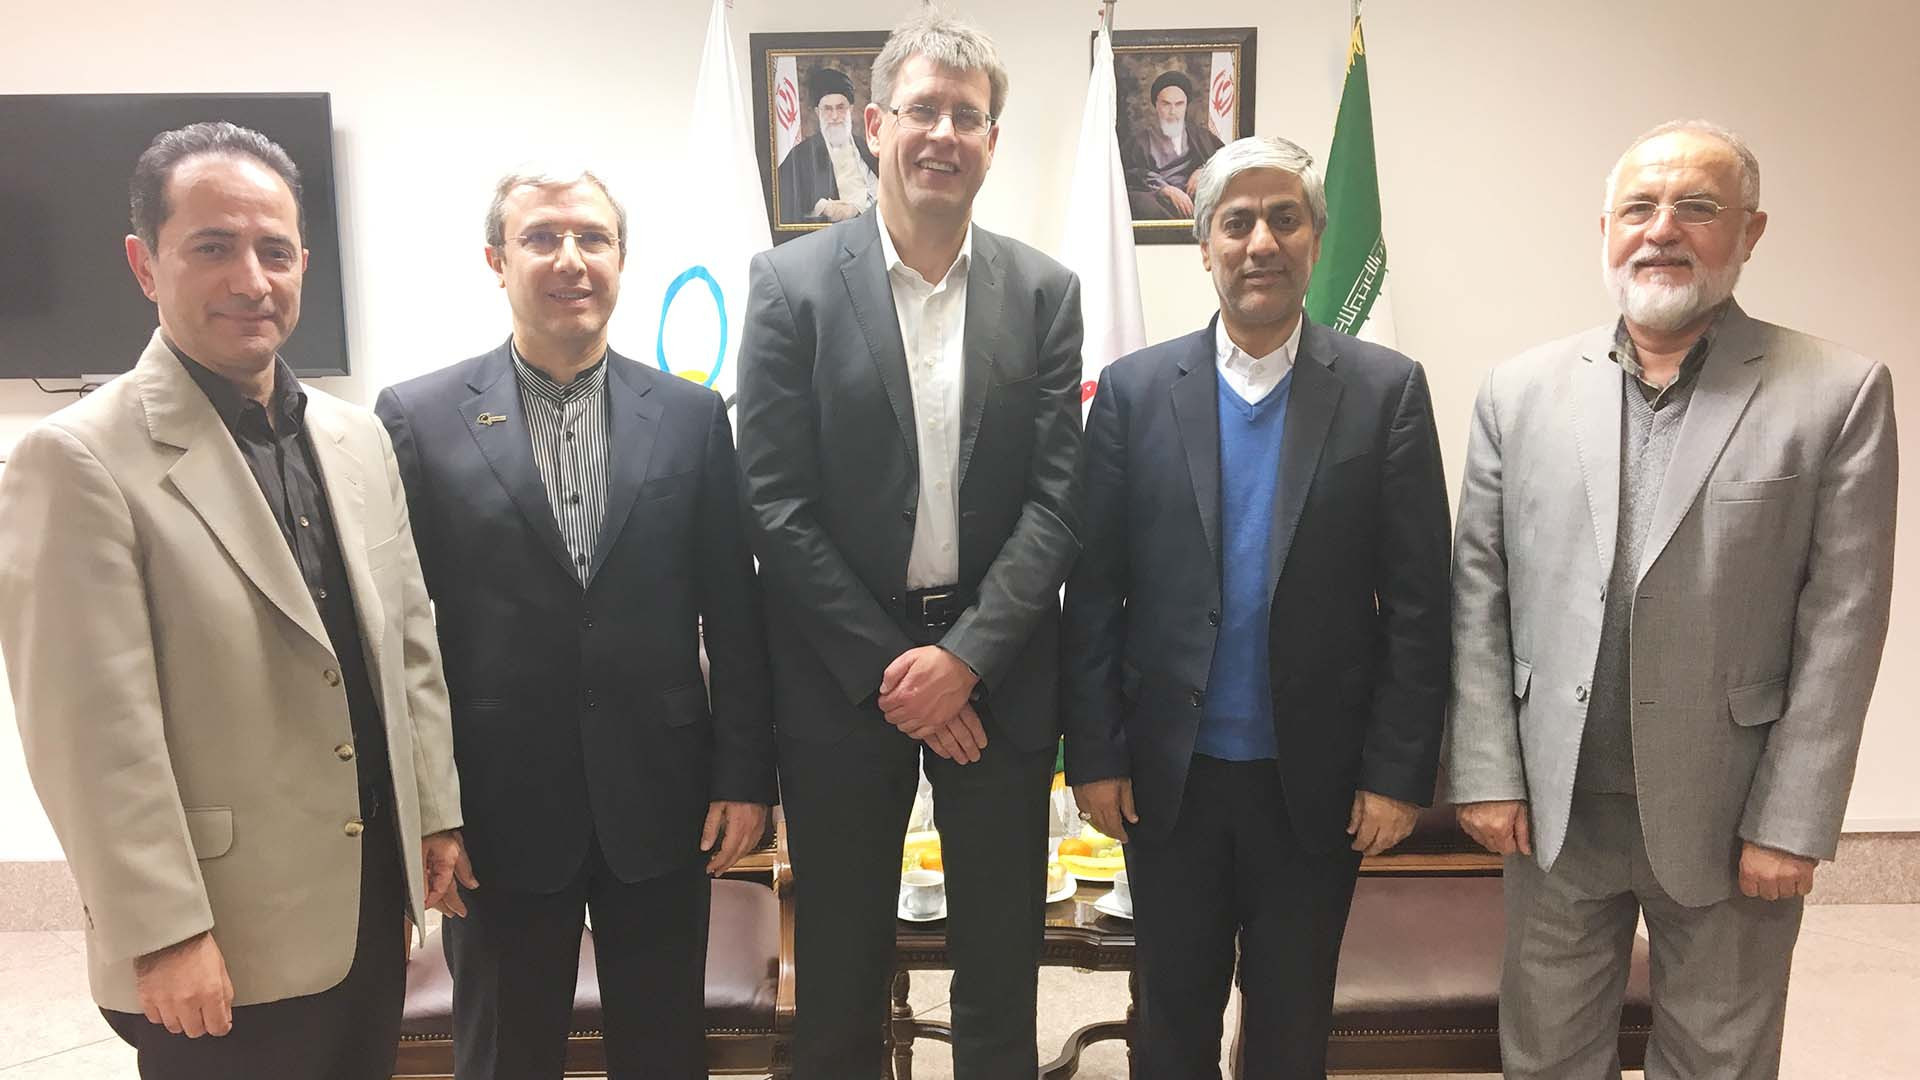 Shahrokh Shahnazi, right, has met several leading officials as secretary general of the National Olympic Committee of the Islamic Republic of Iran, including ITTF President Thomas Weikert ©ITTF